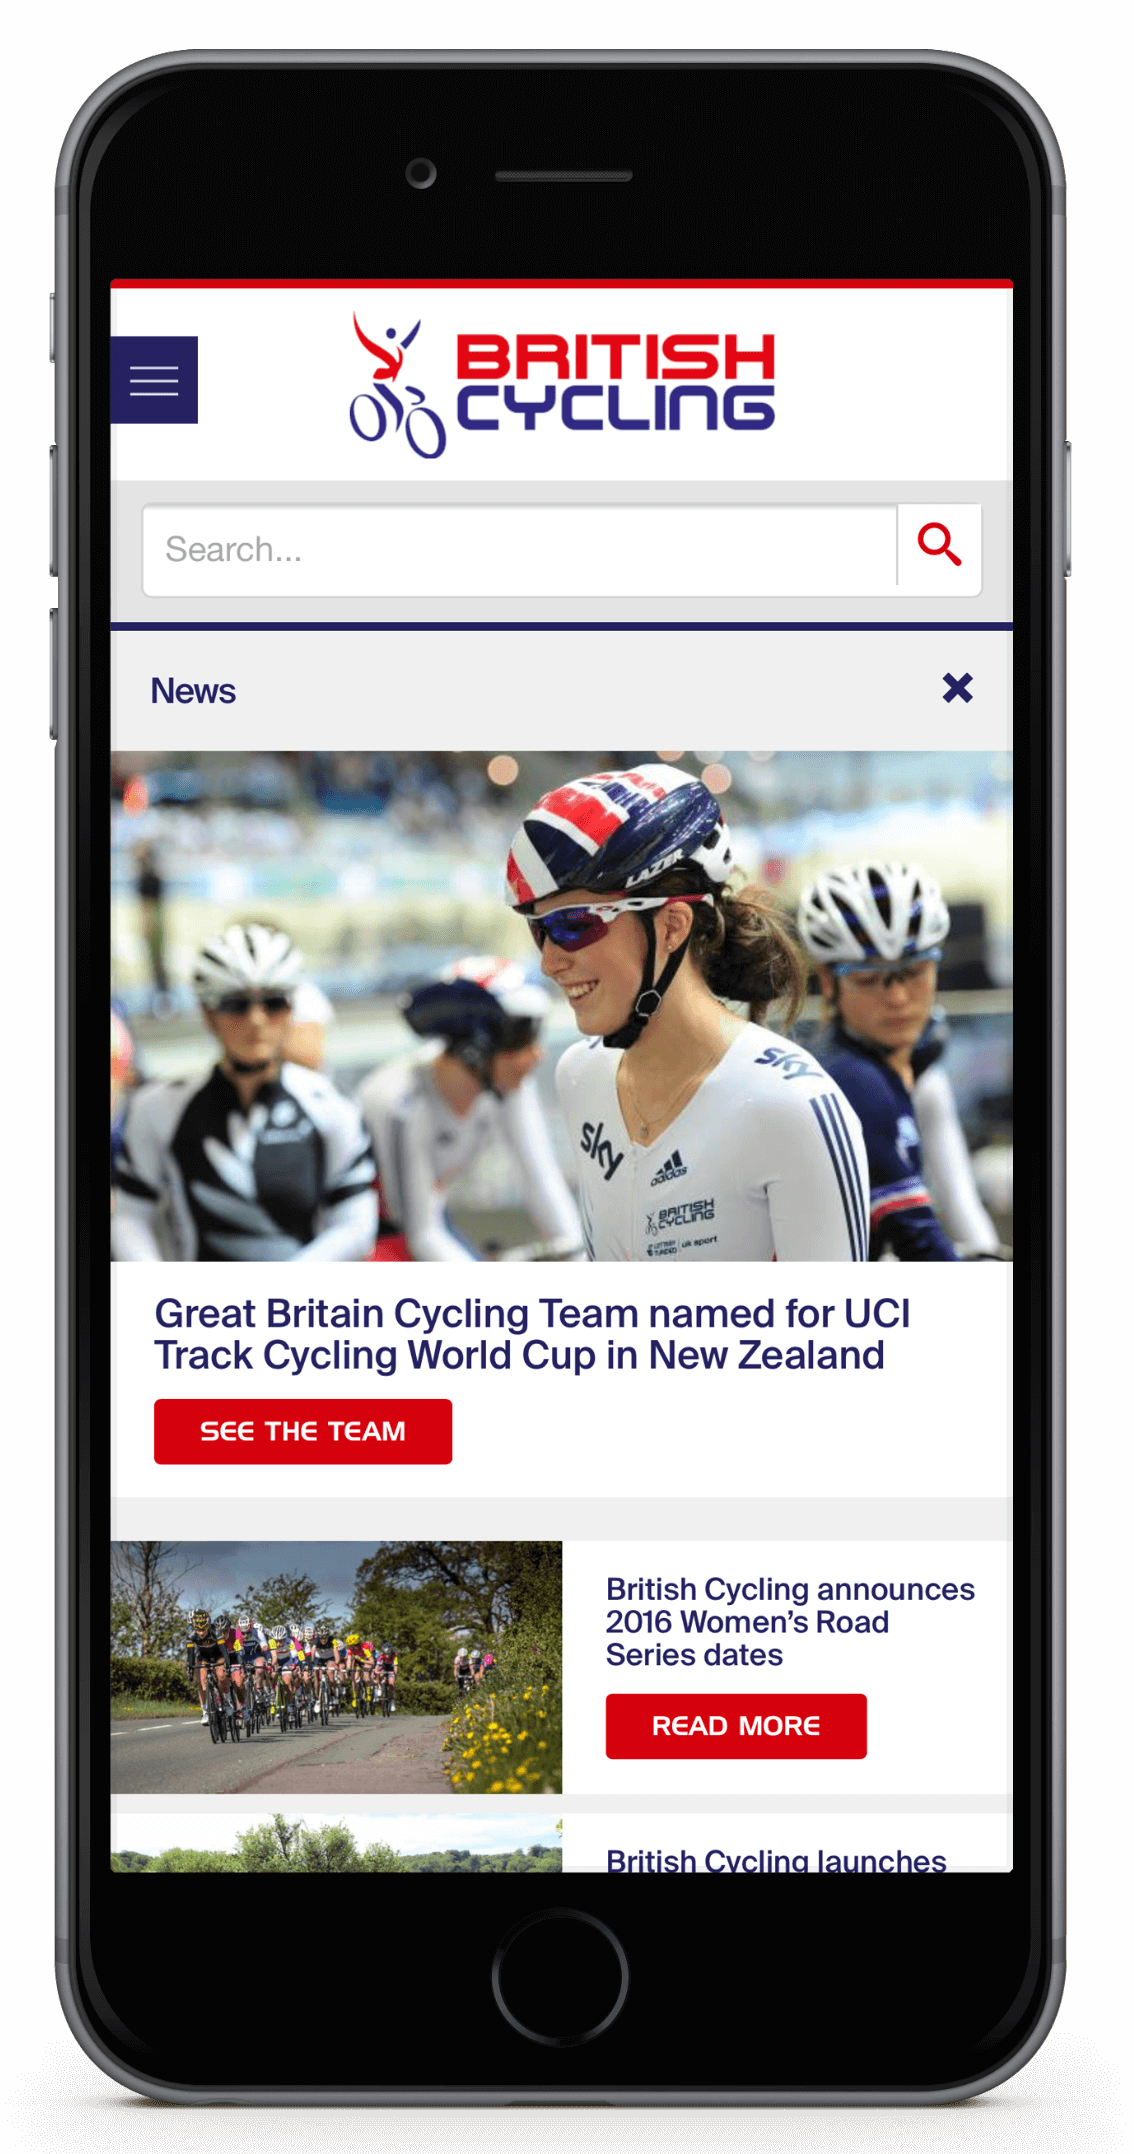 2. British Cycling website on a mobile device!